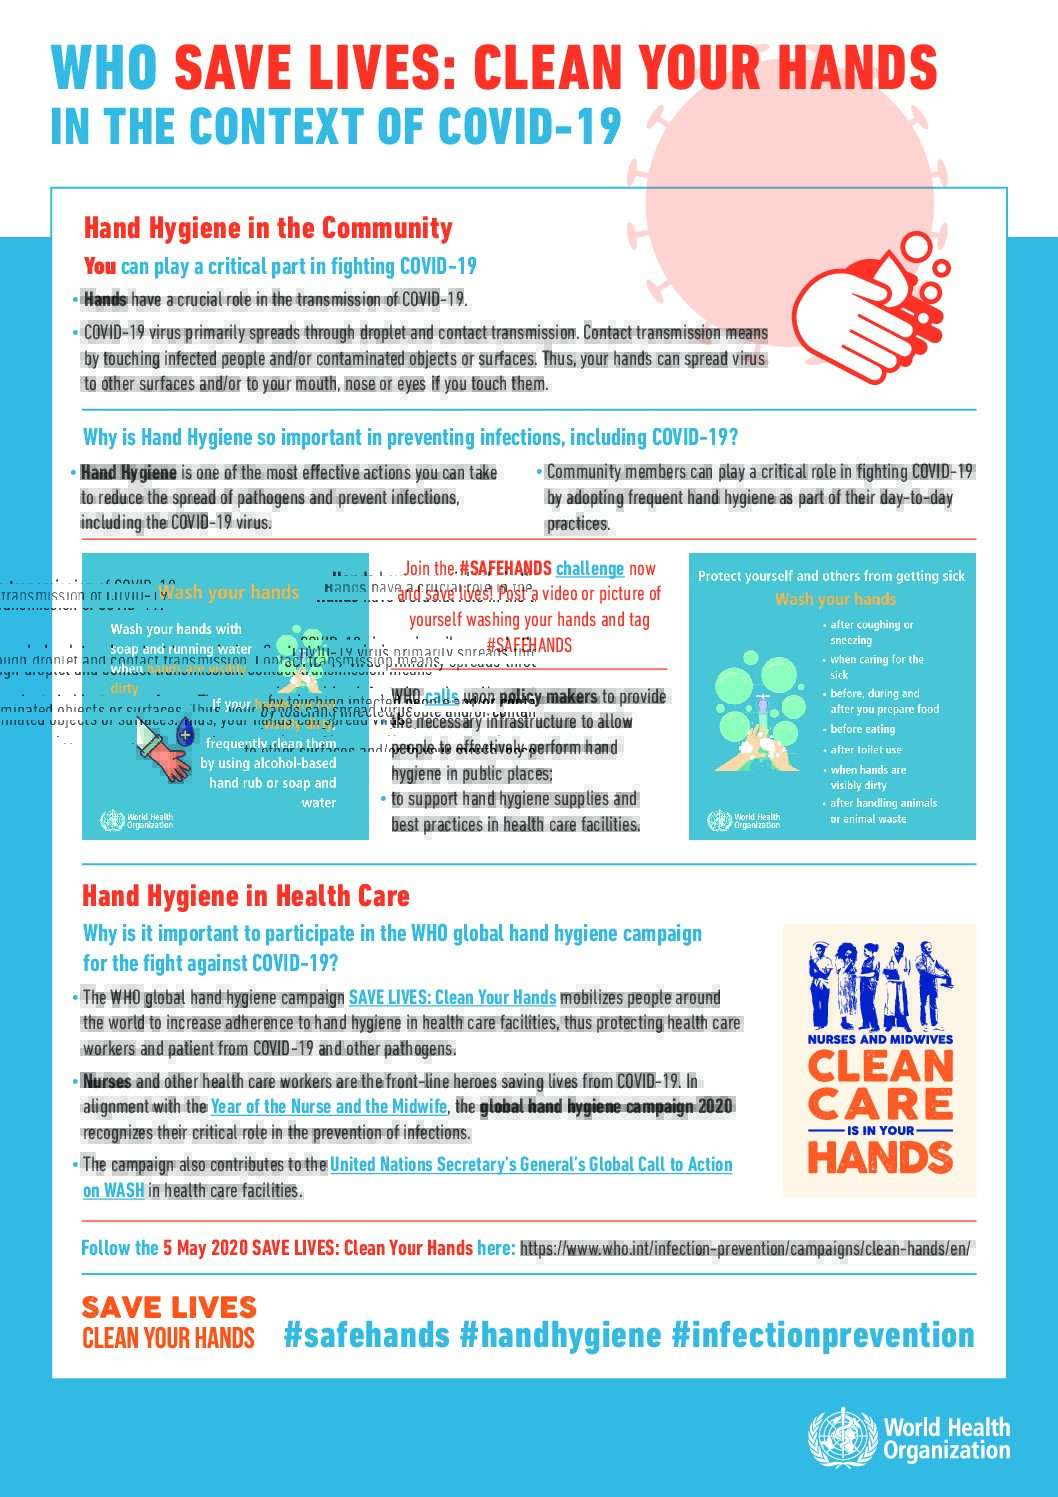 Save Lives - Clean Your Hands (WHO #Safehands Campaign)